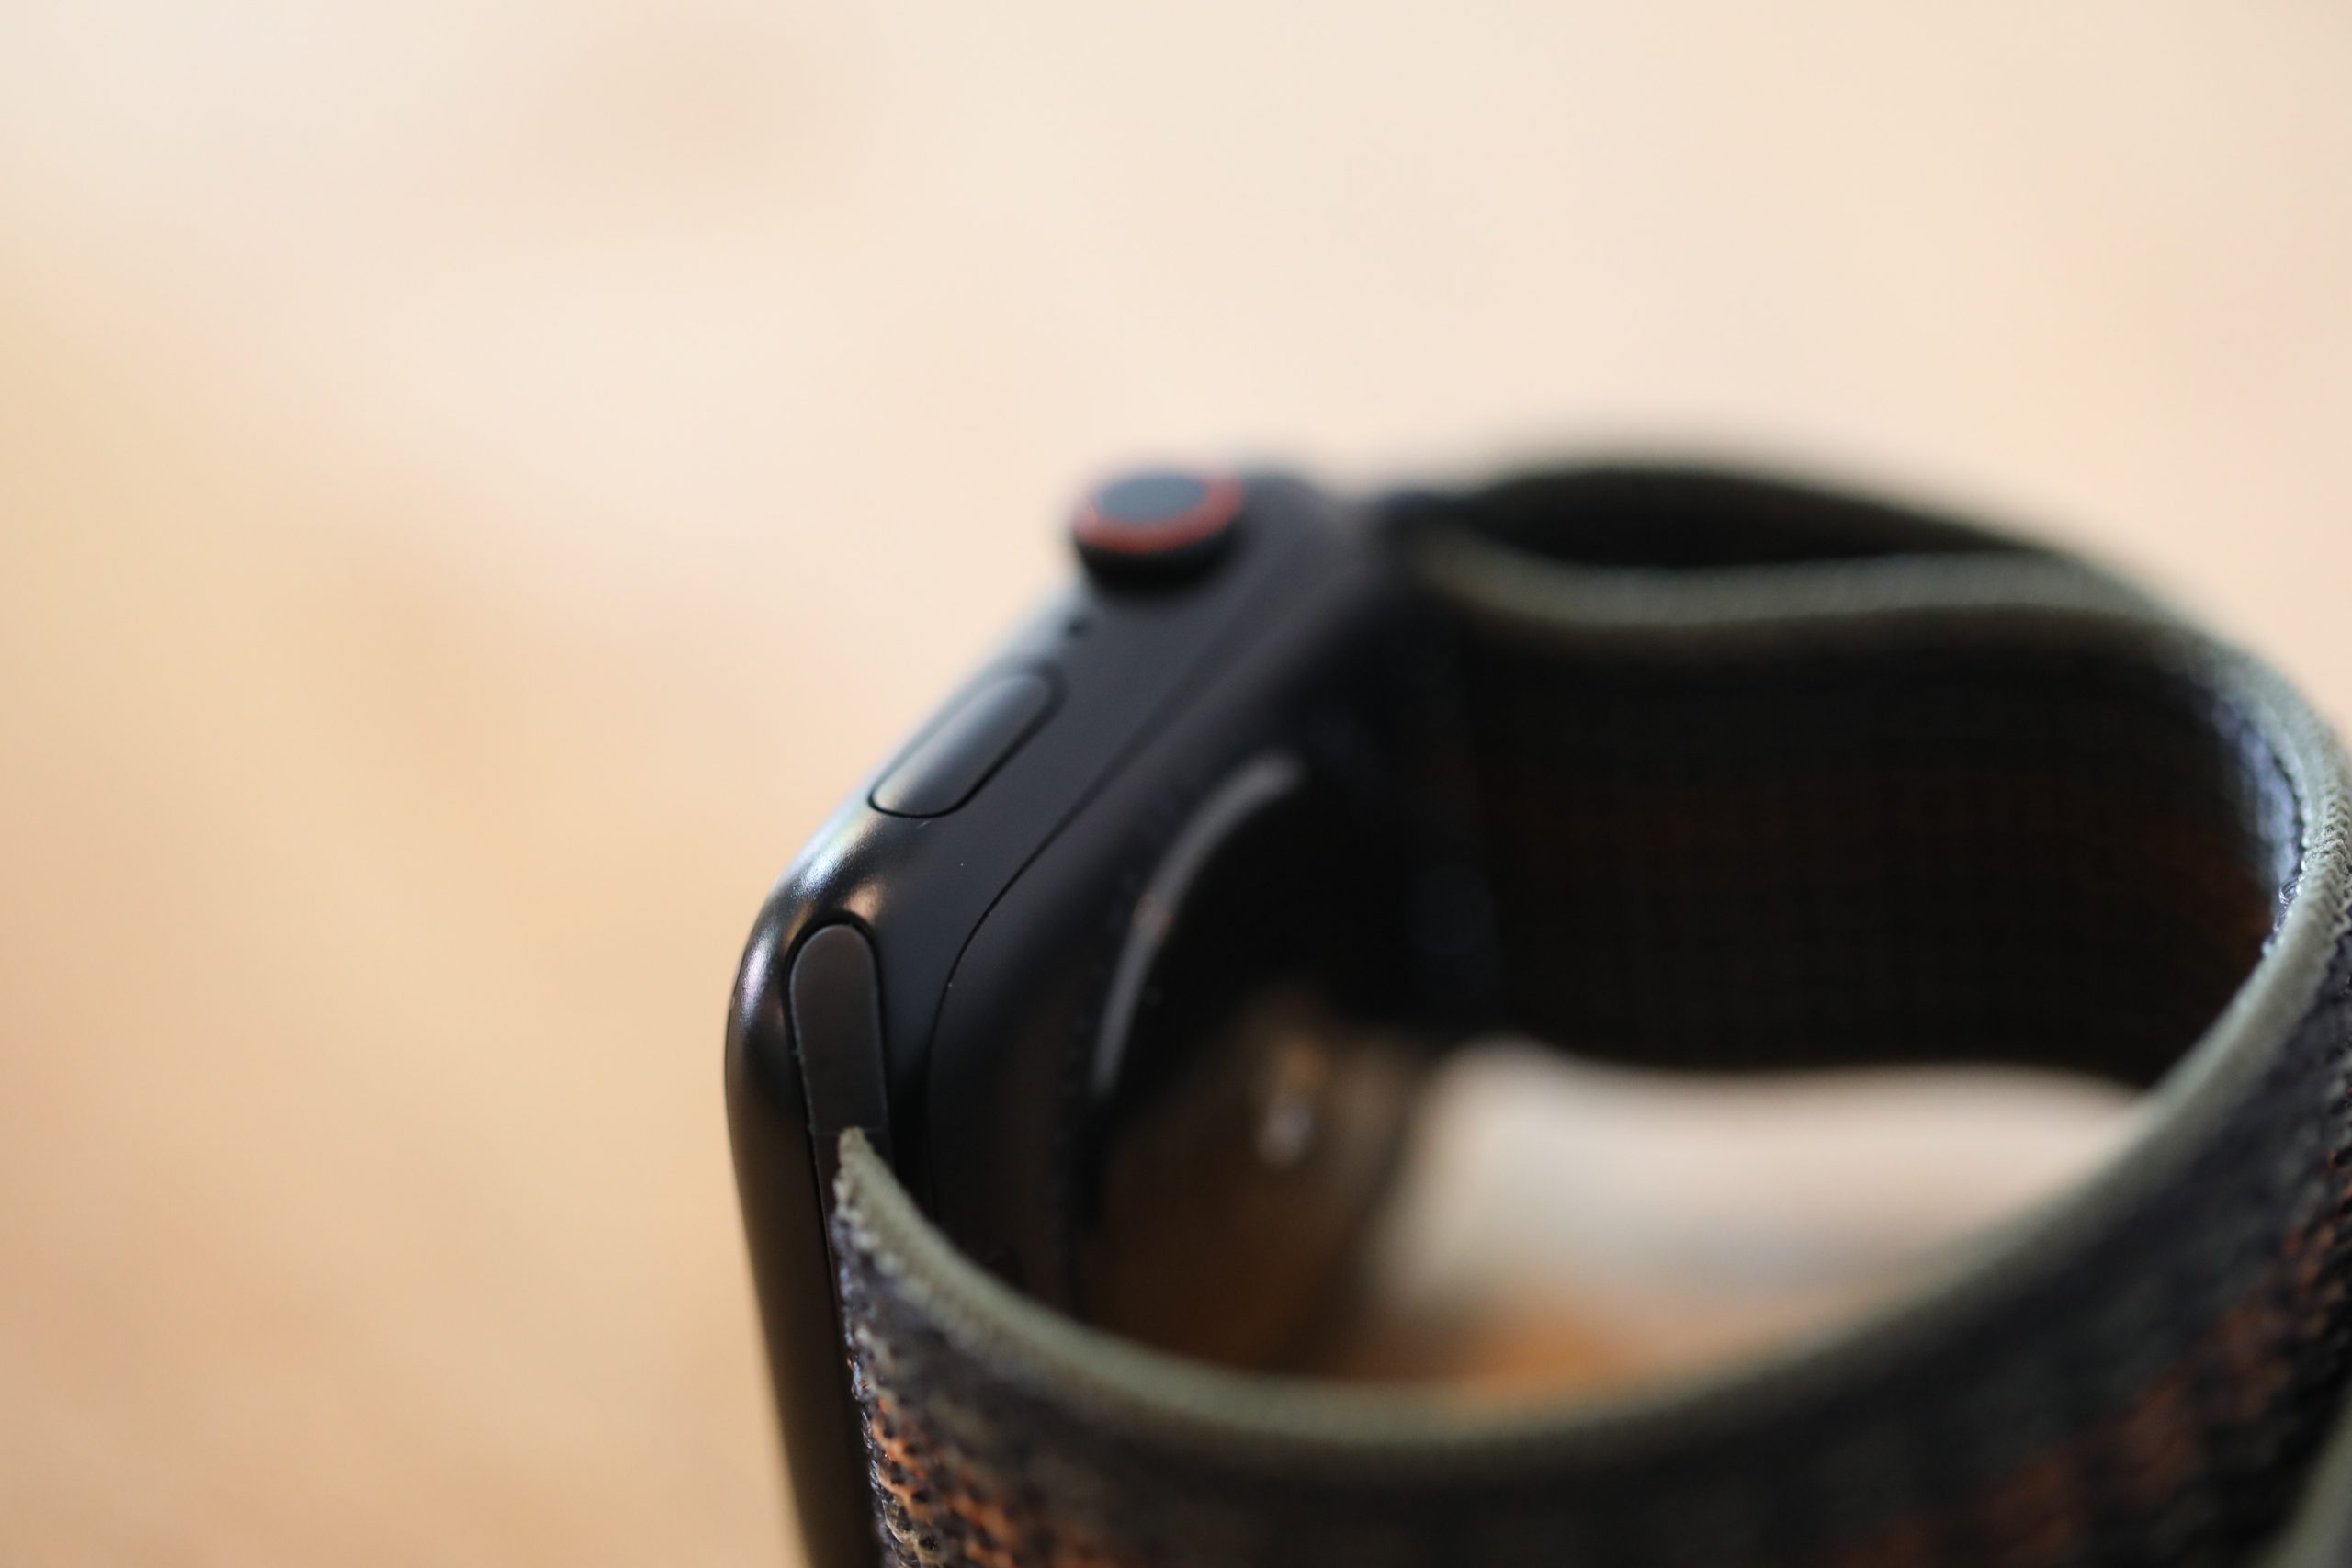 The Apple Watch SE isn’t as much of a compromise as you might think